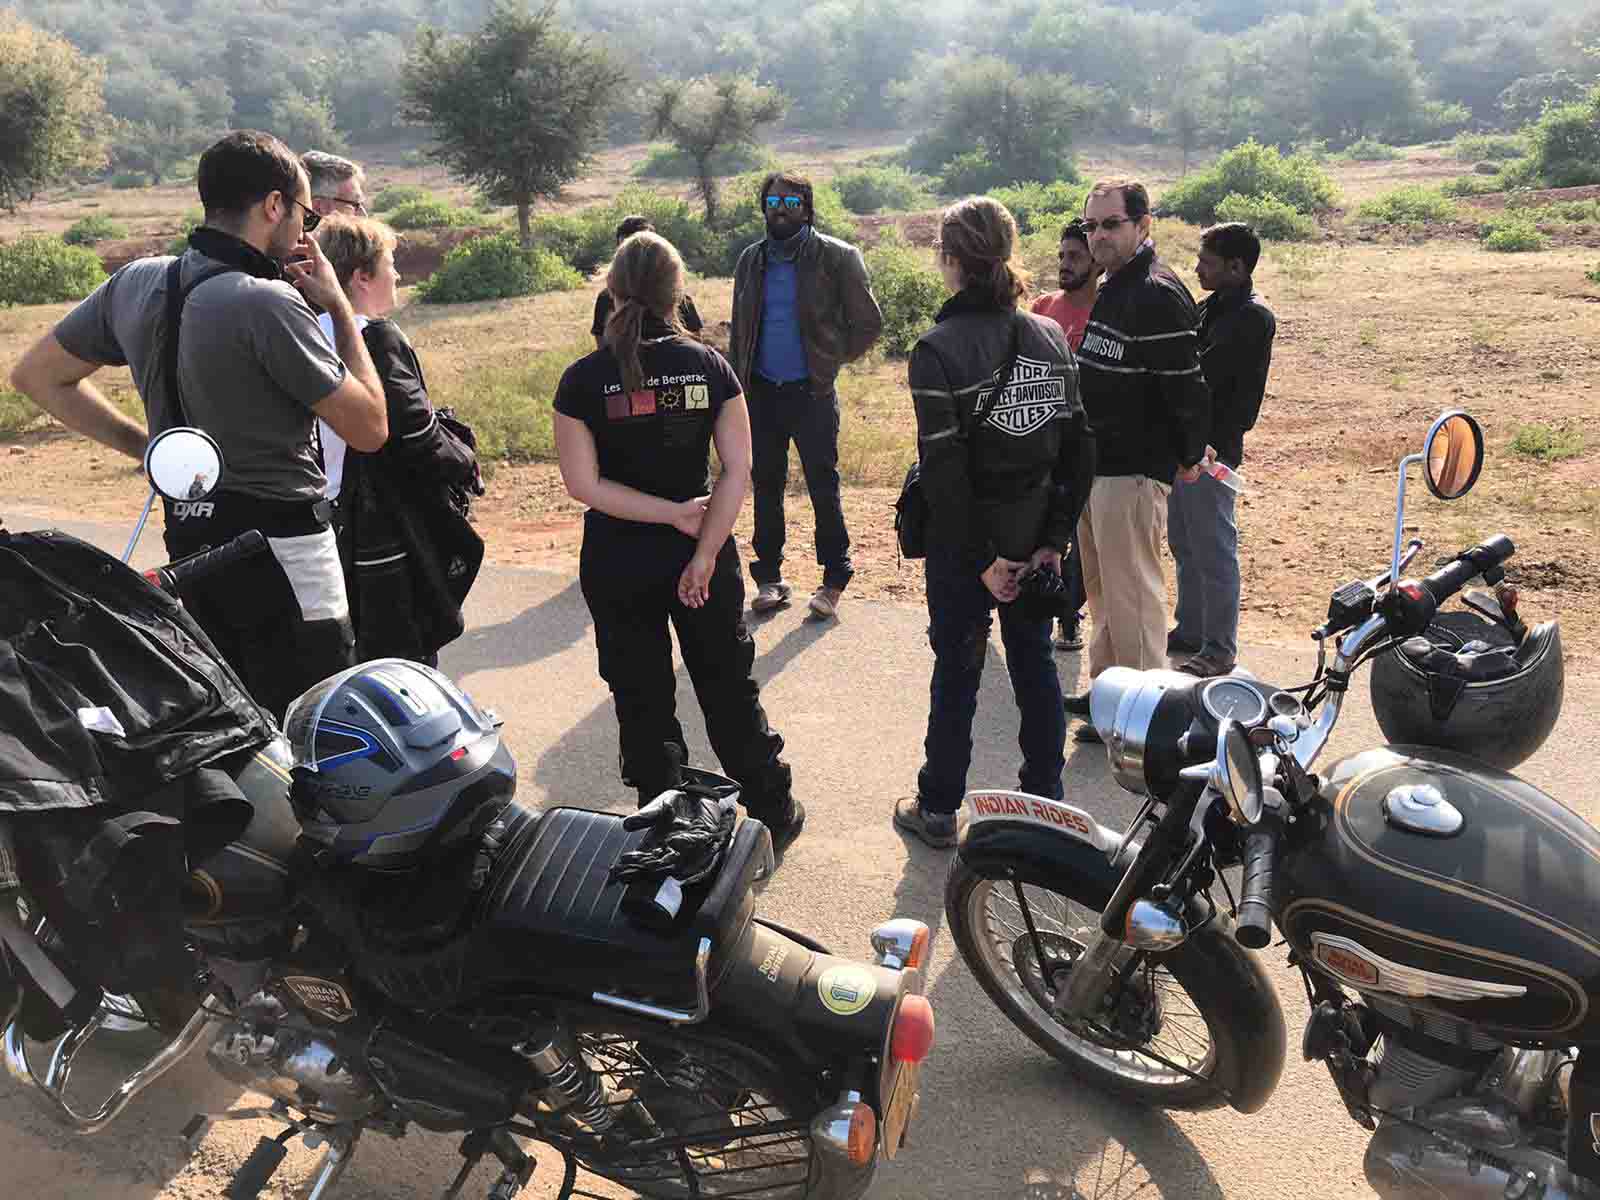 Plan a Motorcycle escapade to India with professionals I Indian Rides offers guided Motorbike tours to India I Group leader